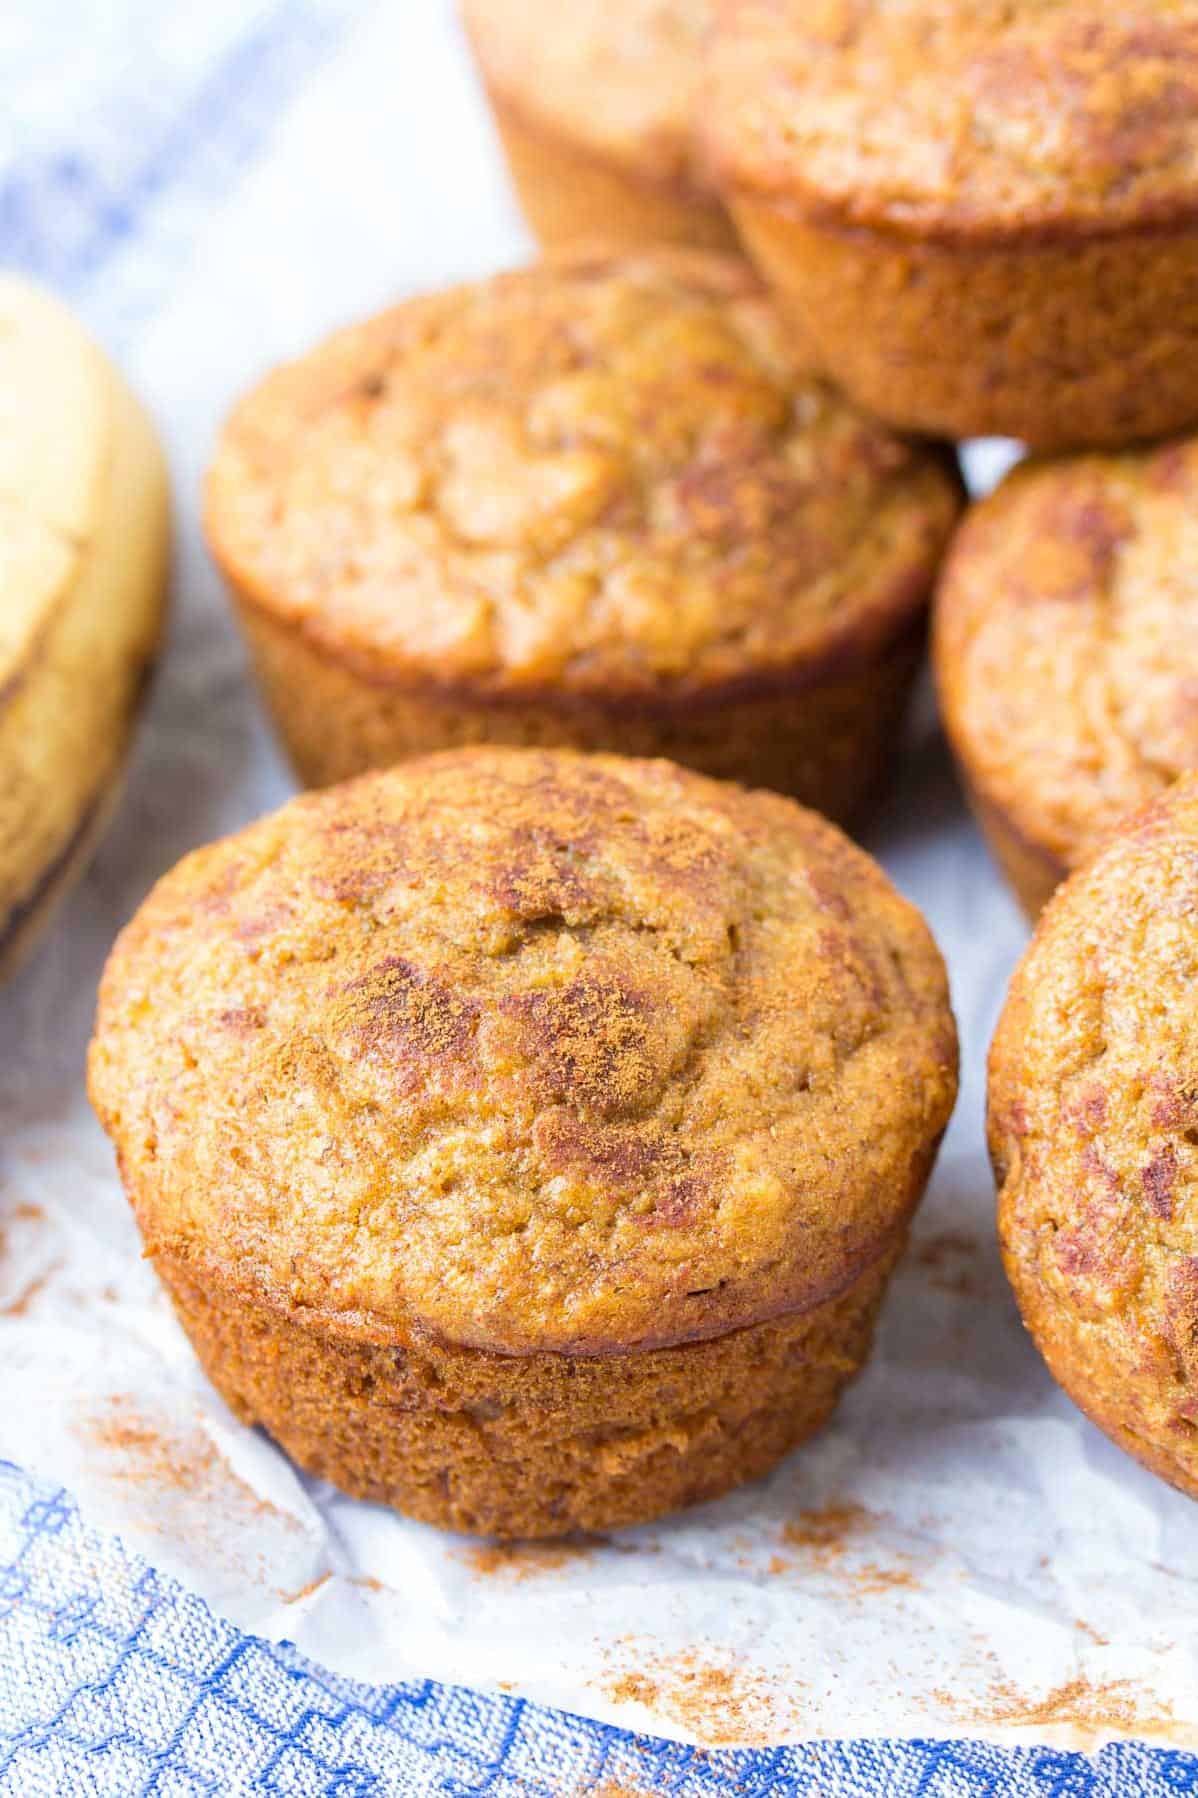  These muffins are bananas, B-A-N-A-N-A-S!